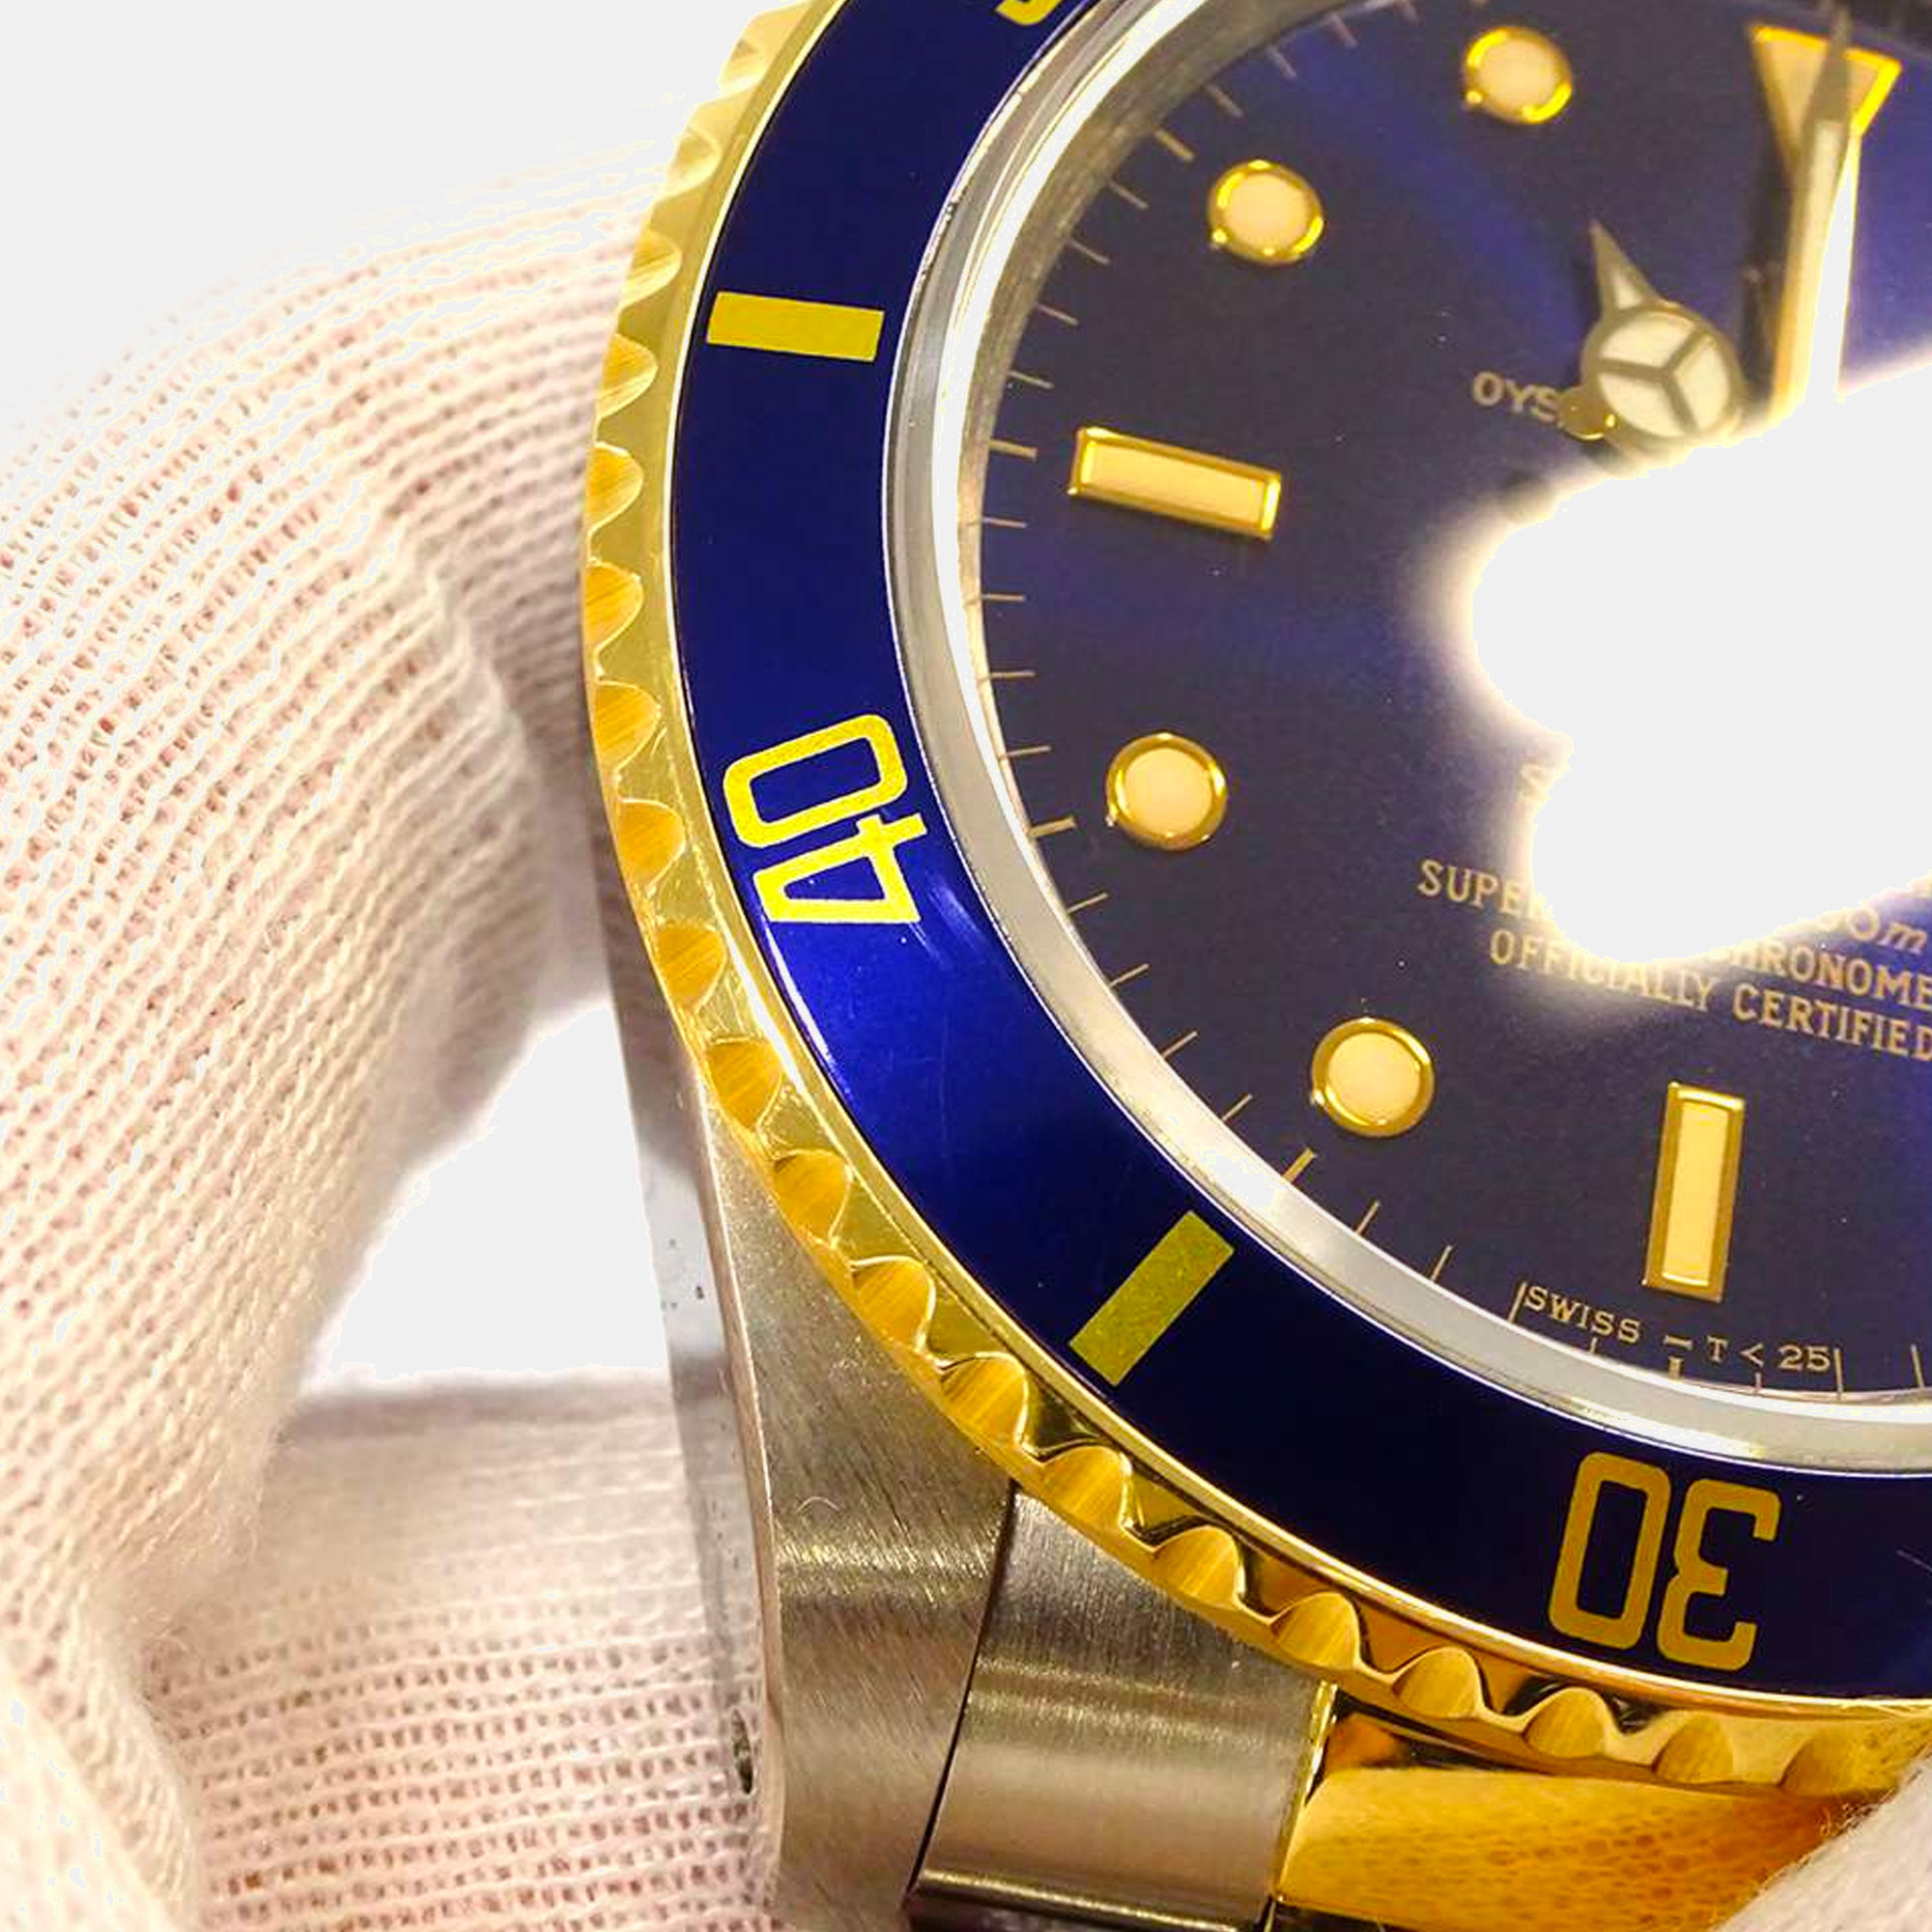 Rolex Blue 18k Yellow Gold And Stainless Steel Submariner 16803 Automatic Men's Wristwatch 40 Mm